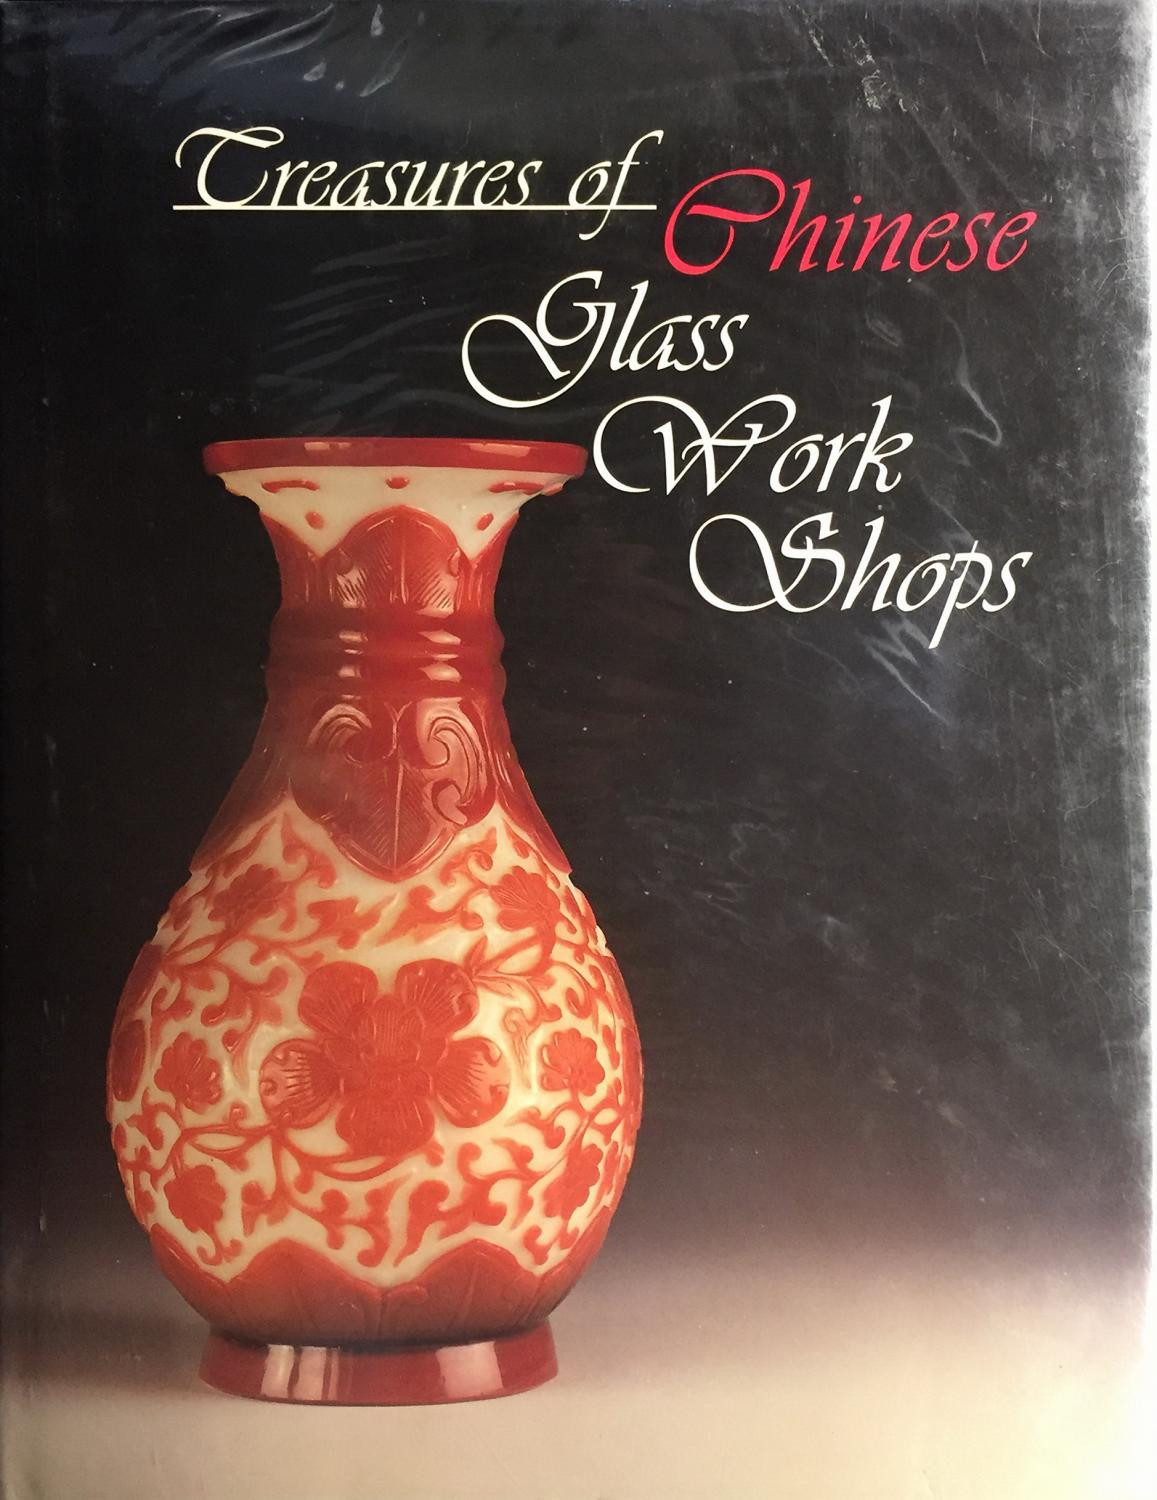 14 Popular Qianlong Vase Price 2024 free download qianlong vase price of treasures of chinese glass work shops selection of chinese qing in treasures of chinese glass work shops selection of chinese qing dynasty glass in the ina